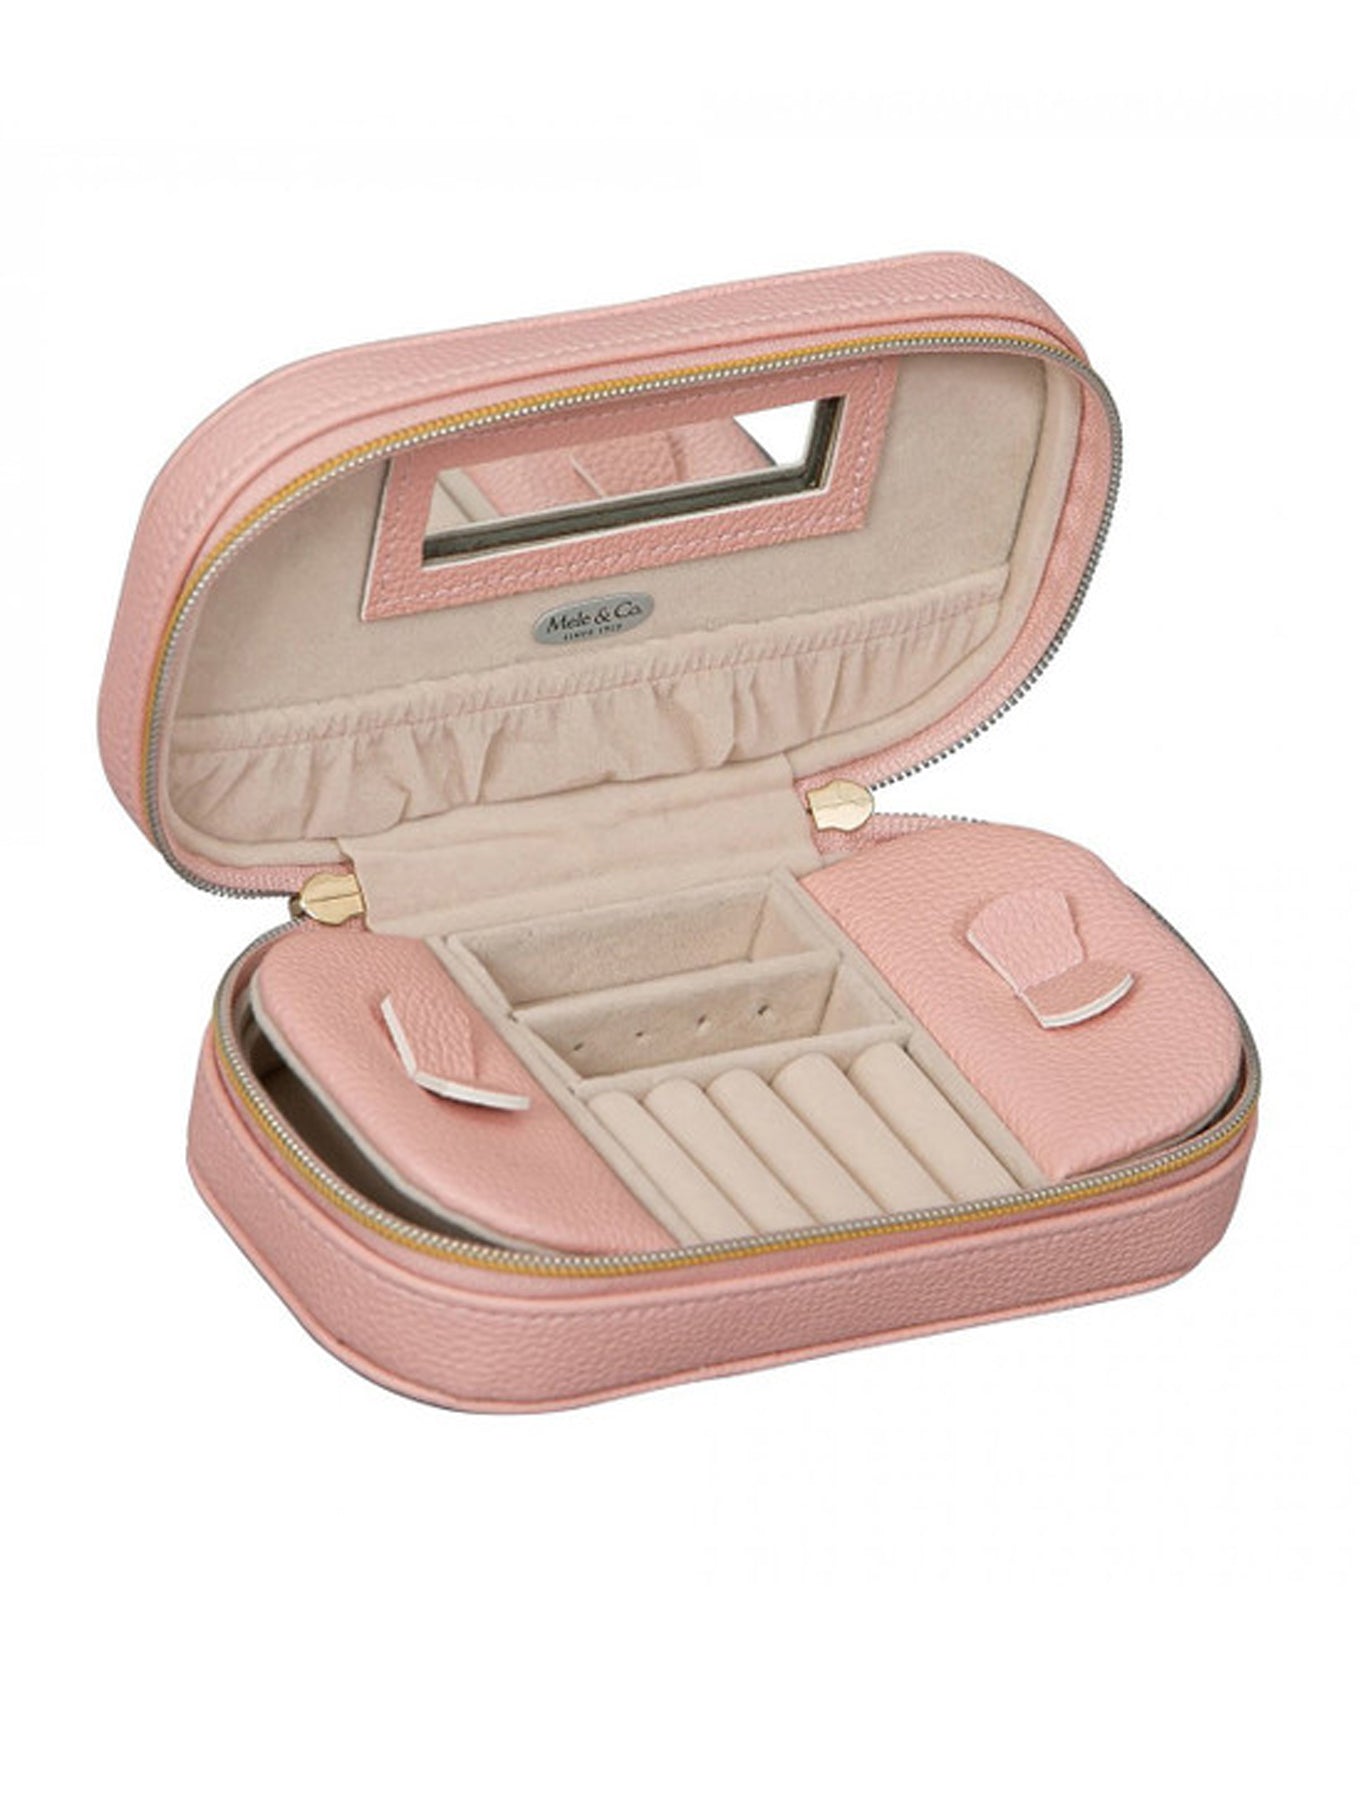 Lucille Travel Jewelry Case C147894